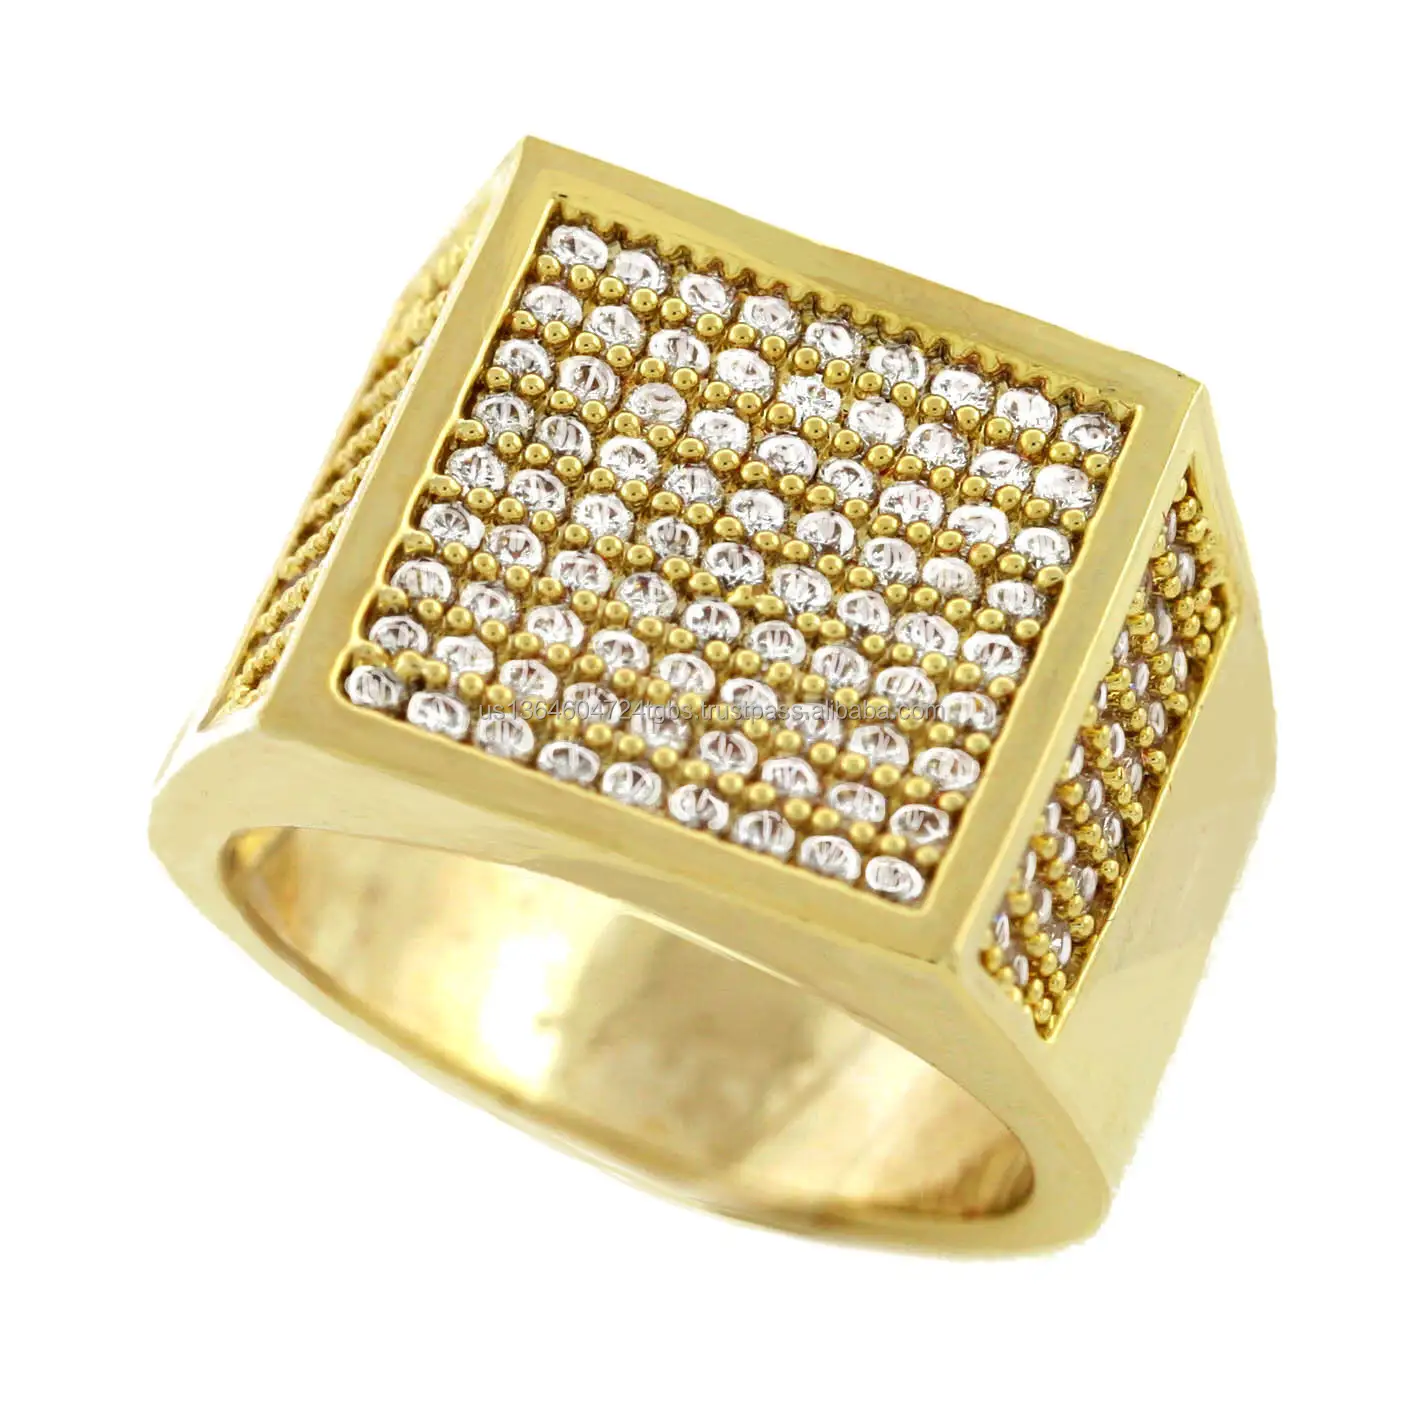 Light weight 14K Gold Plated Sized Square Ring with Iced CZ with Mciropaved prongsetting By A Class A Collection